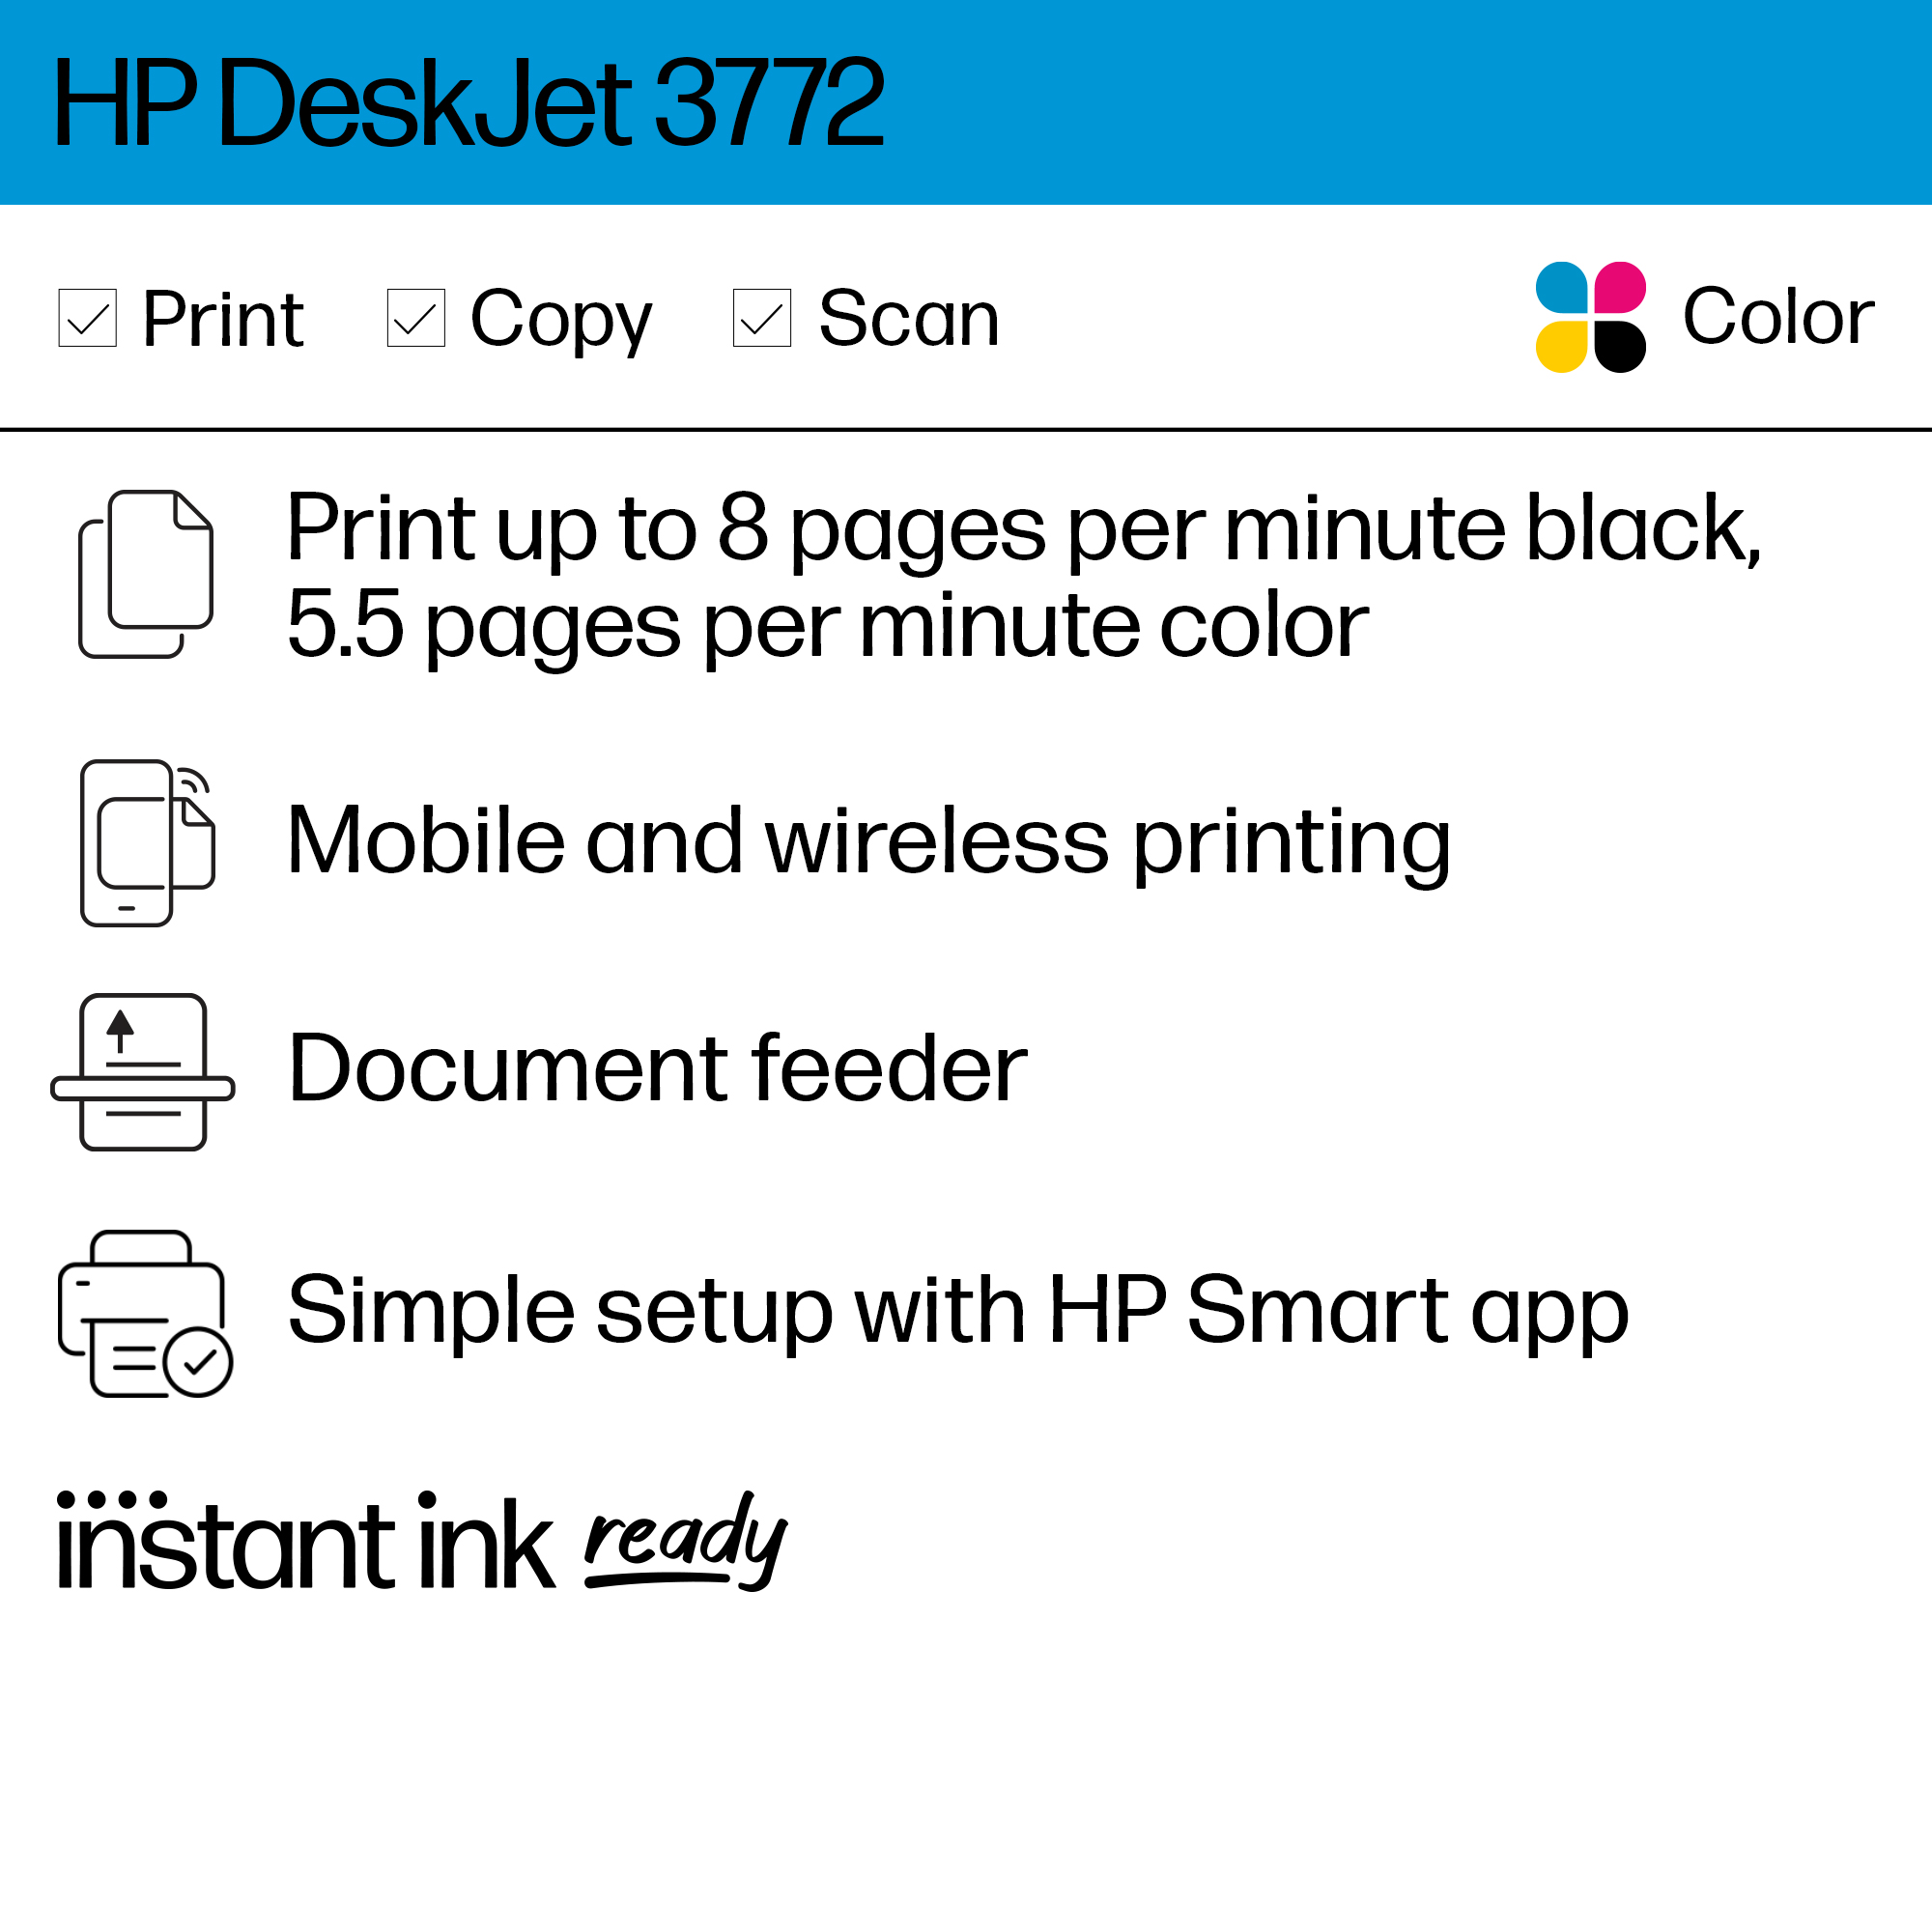 HP DeskJet 3772 All-in-One Wireless Color Inkjet Printer, 6 Months FREE ink with HP Instant Ink - image 3 of 11